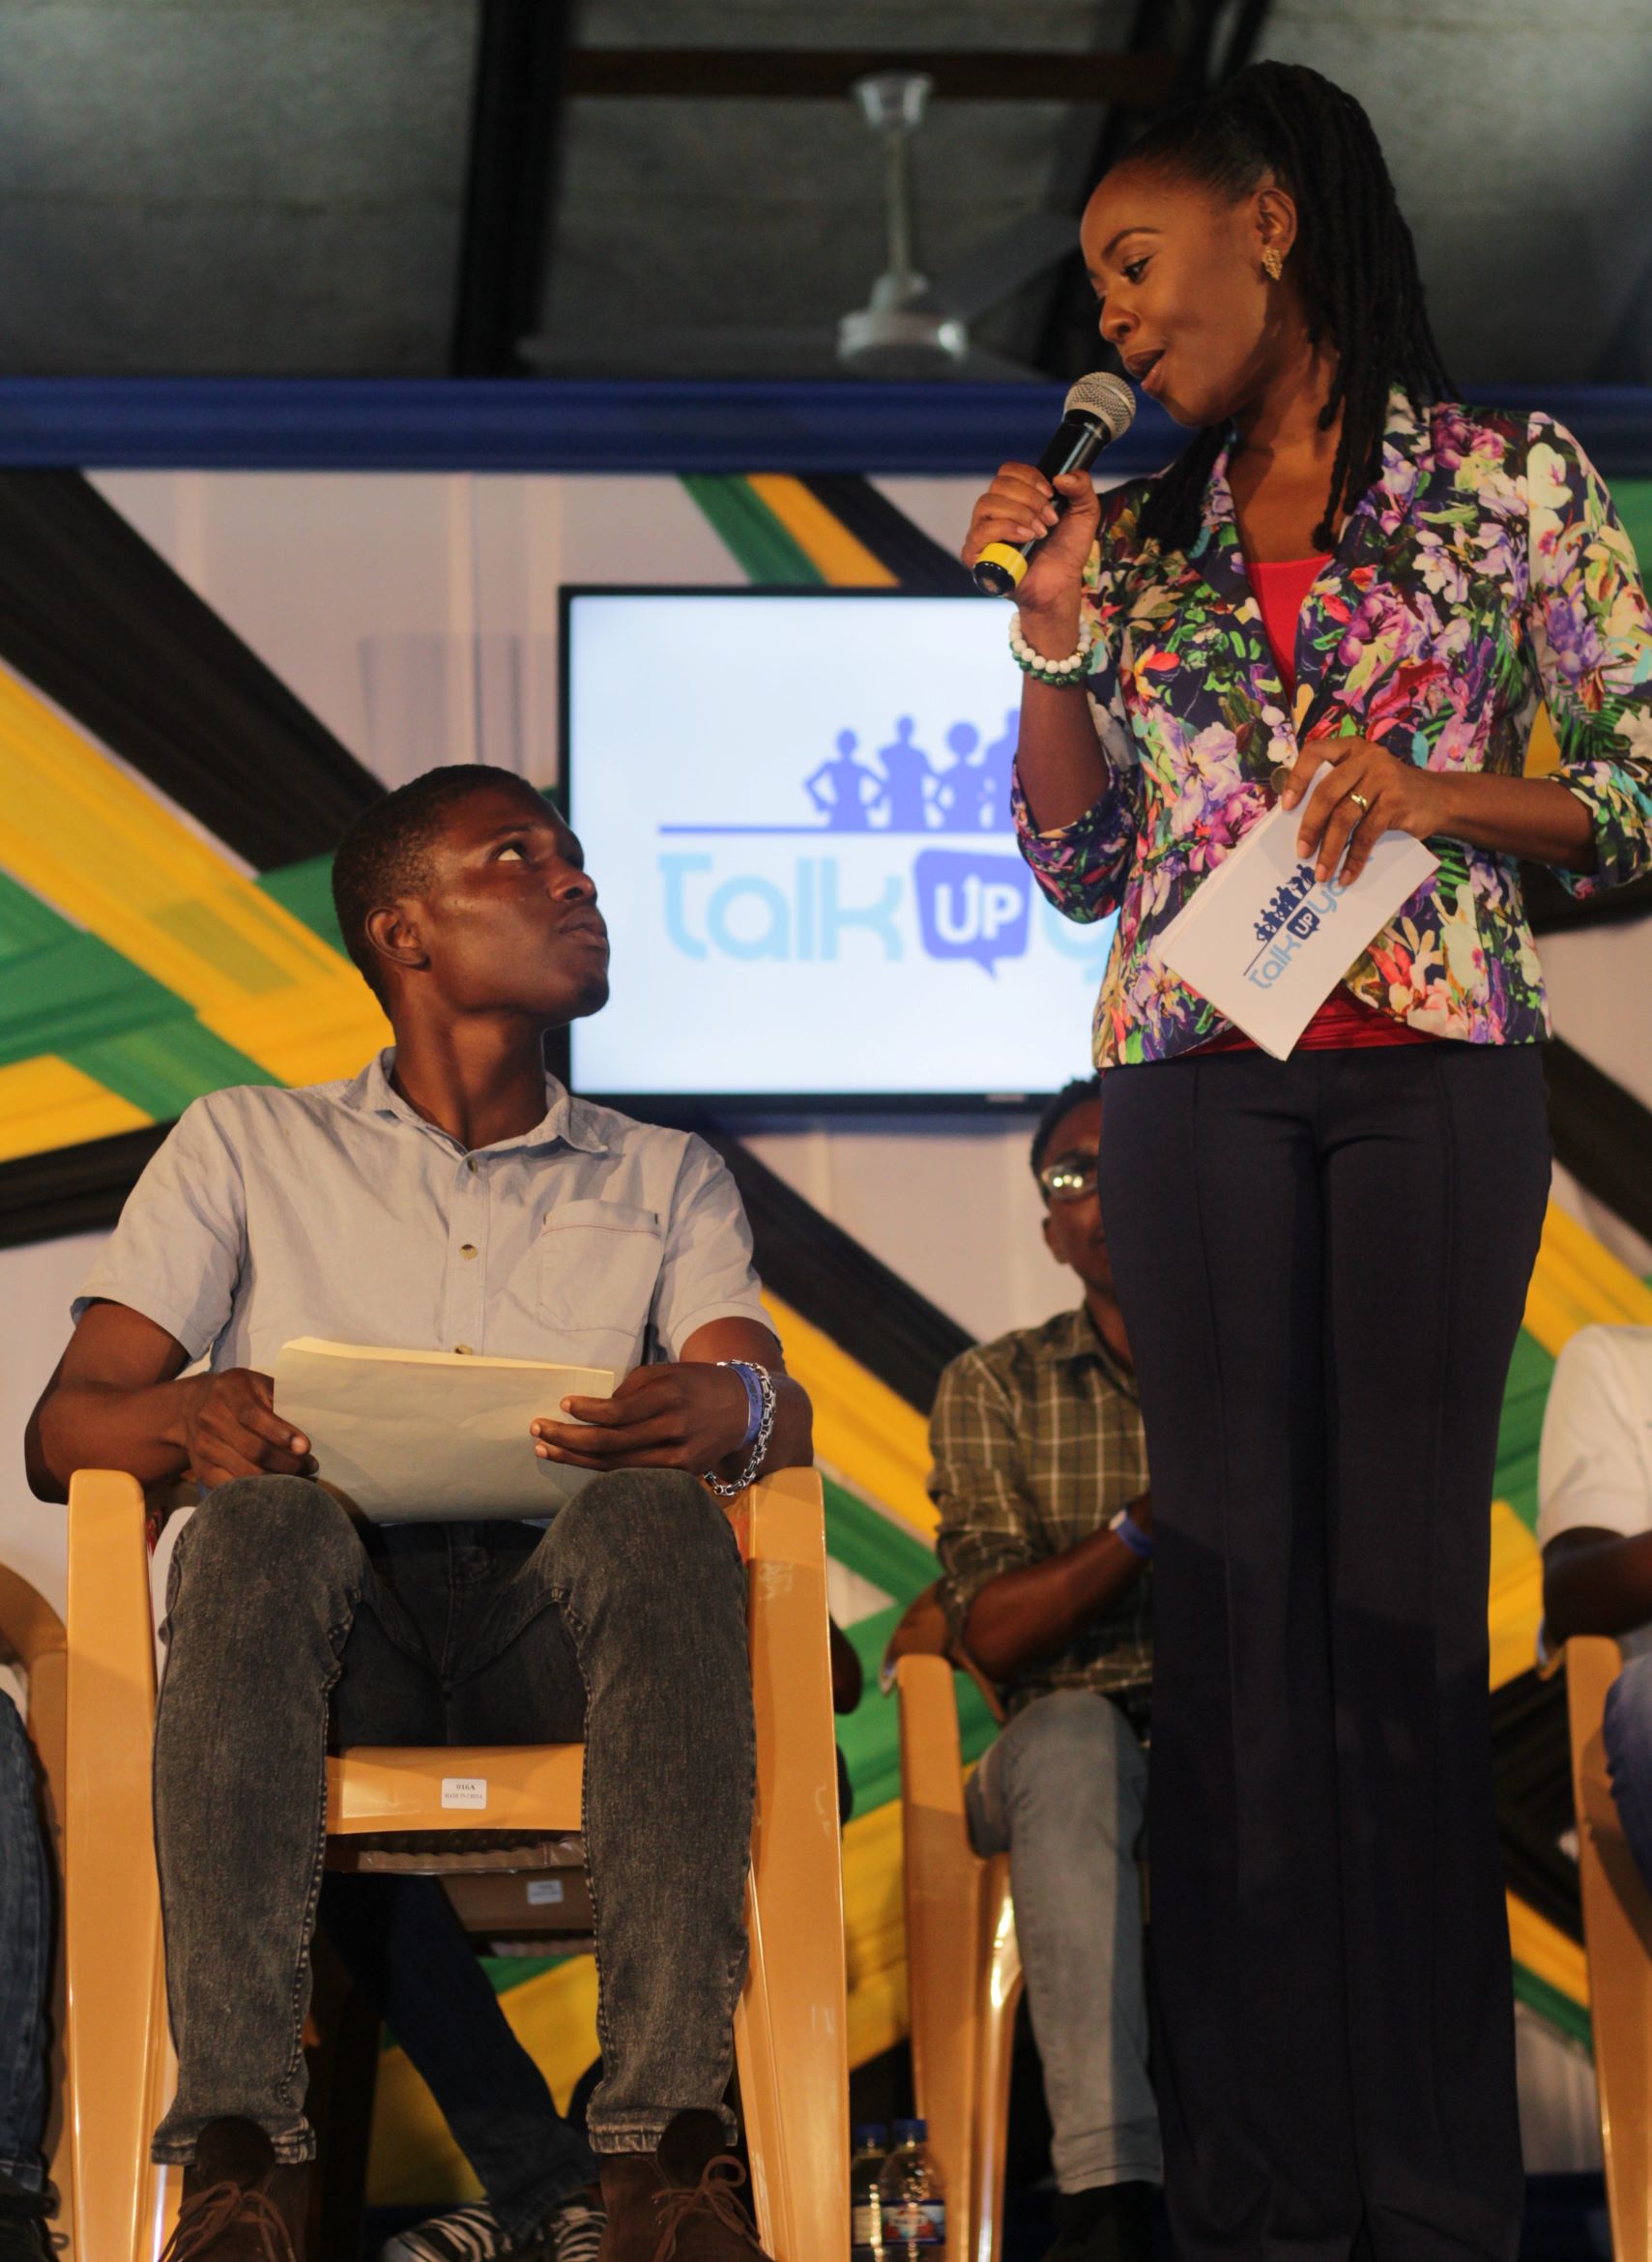 'Talk Up Yout’ Founder and Co-Executive Producer, Emprezz Golding engages with a student during an ice-breaker prior to the start of the town hall meeting for the “Youth Development Through Dialogue” held at Campion College on November 9 2018. Photo by Tatyana Atkinson/UJS News